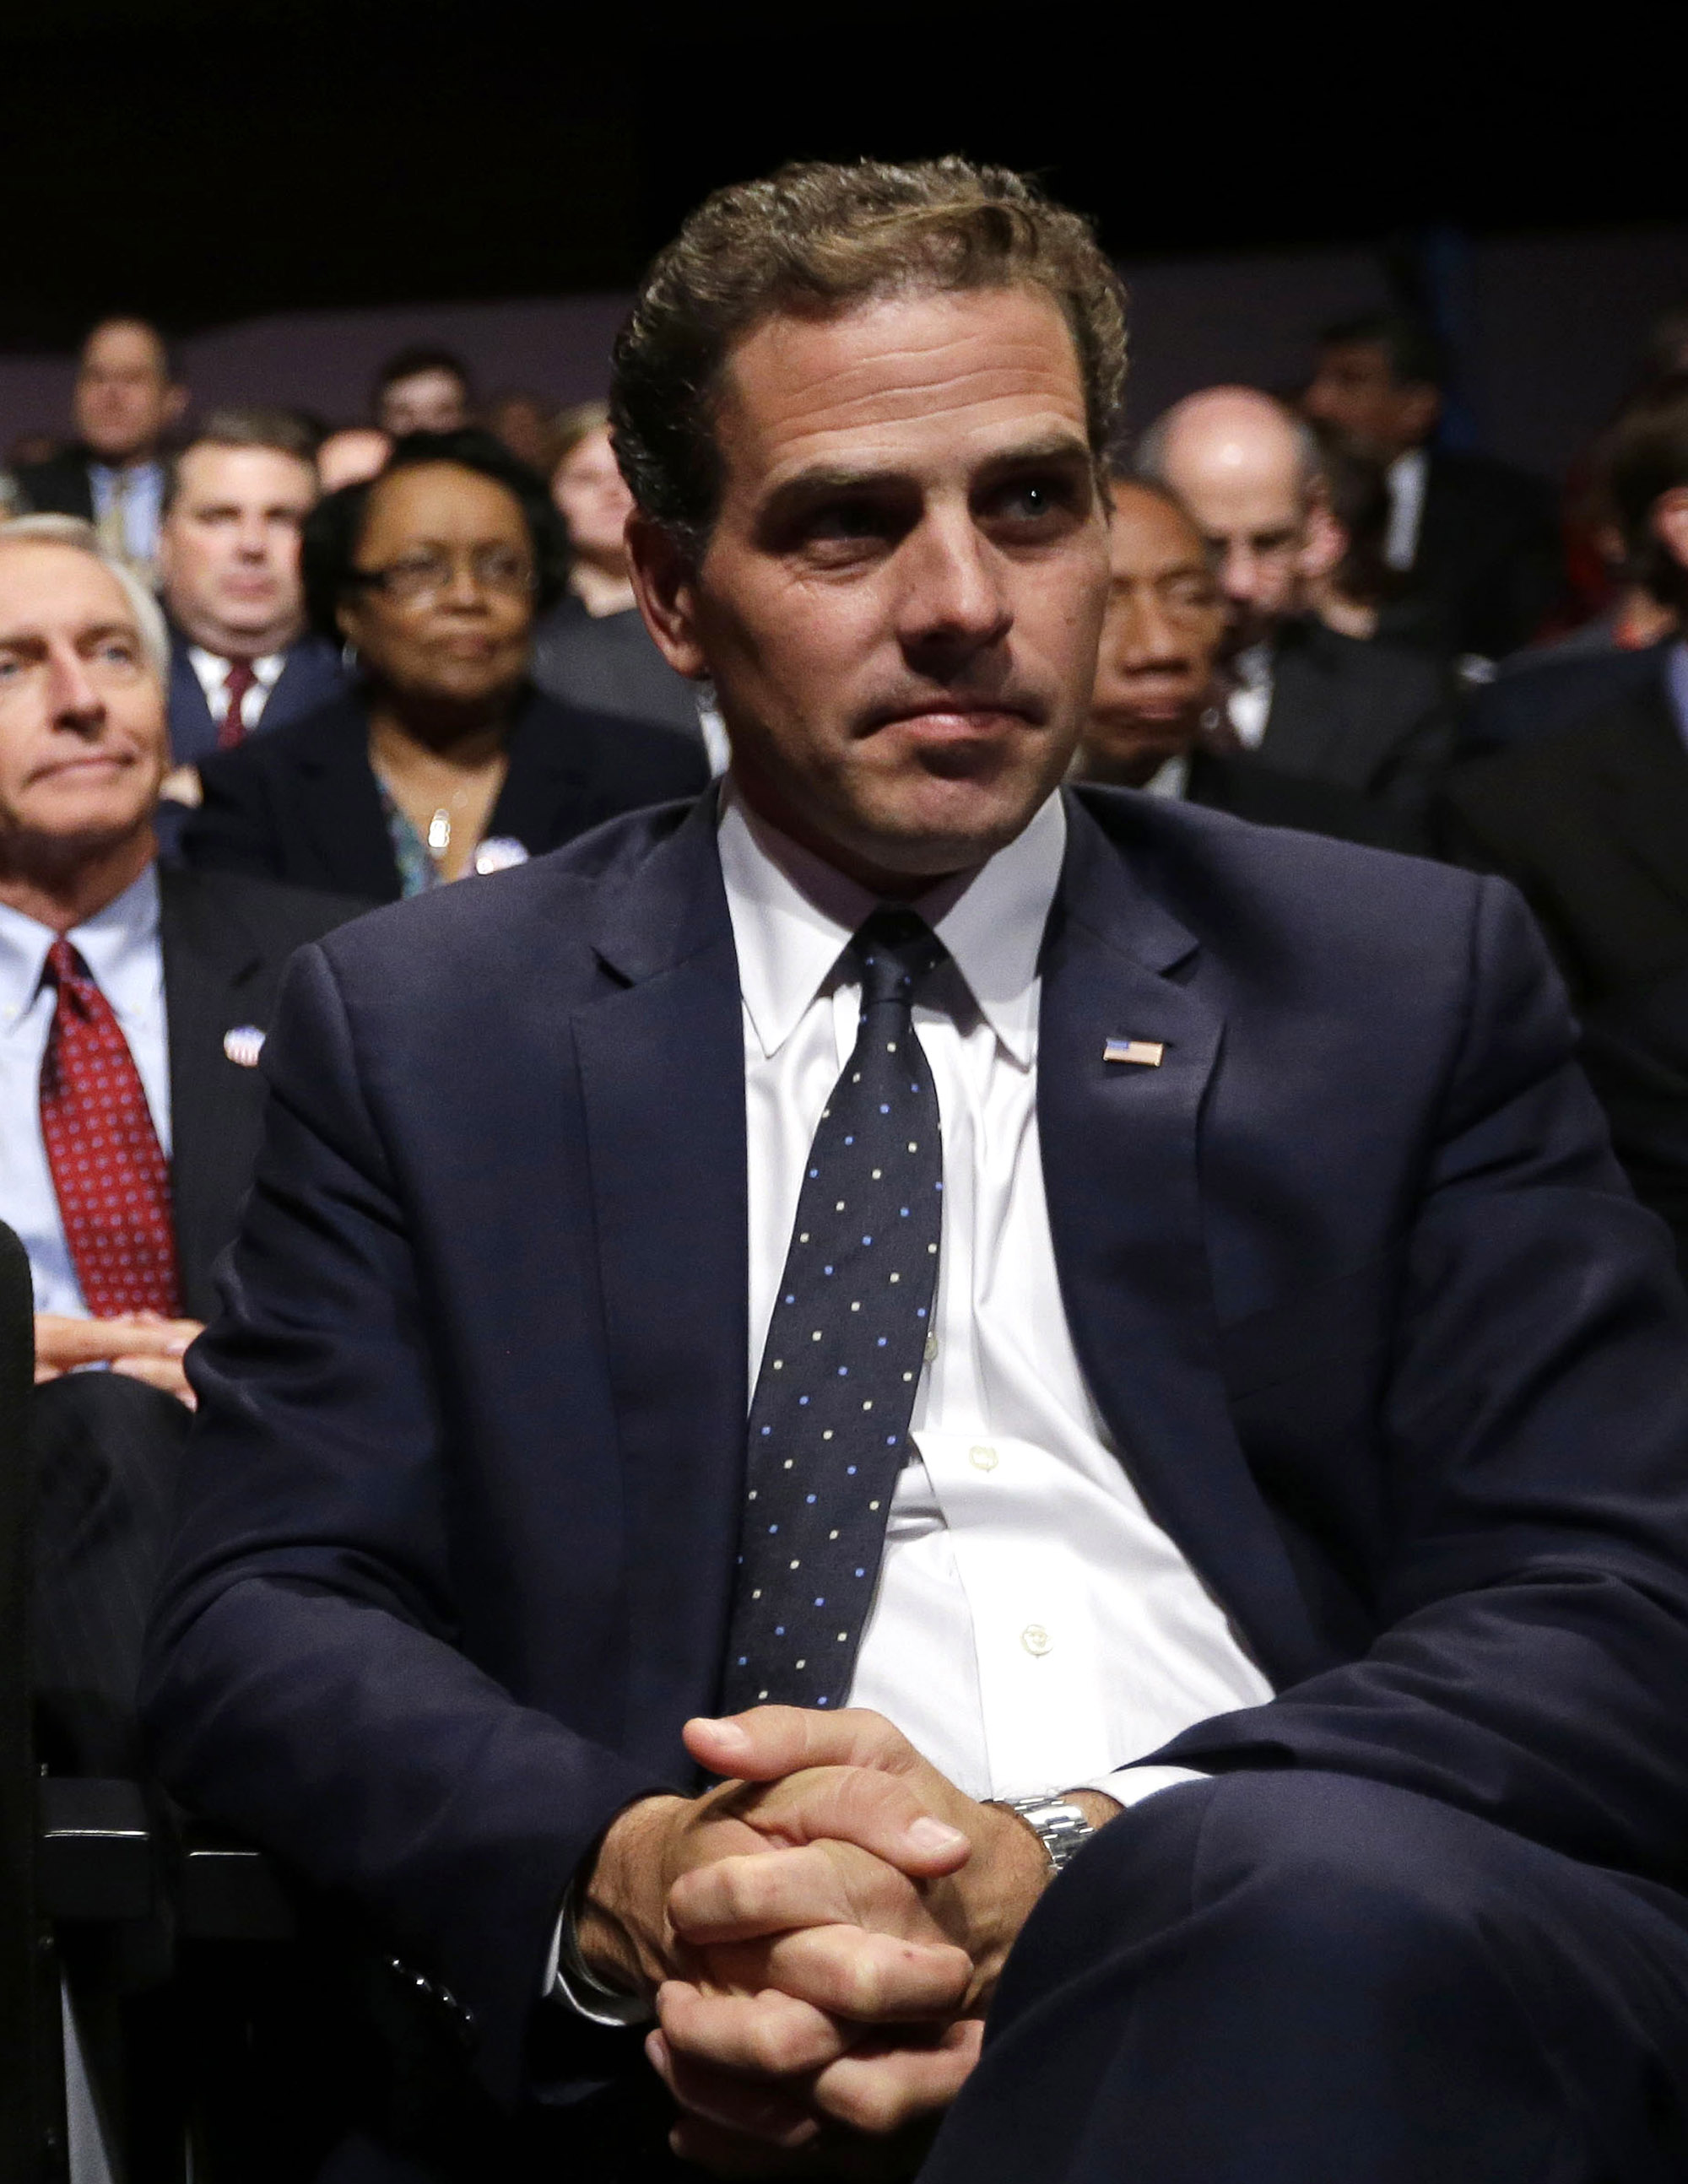 Hunter Biden waits for the start of the his father's, Vice President Joe Biden's, debate at Centre College in Danville, Ky. on Oct. 11, 2012. (Pablo Martinez Monsivais—AP)